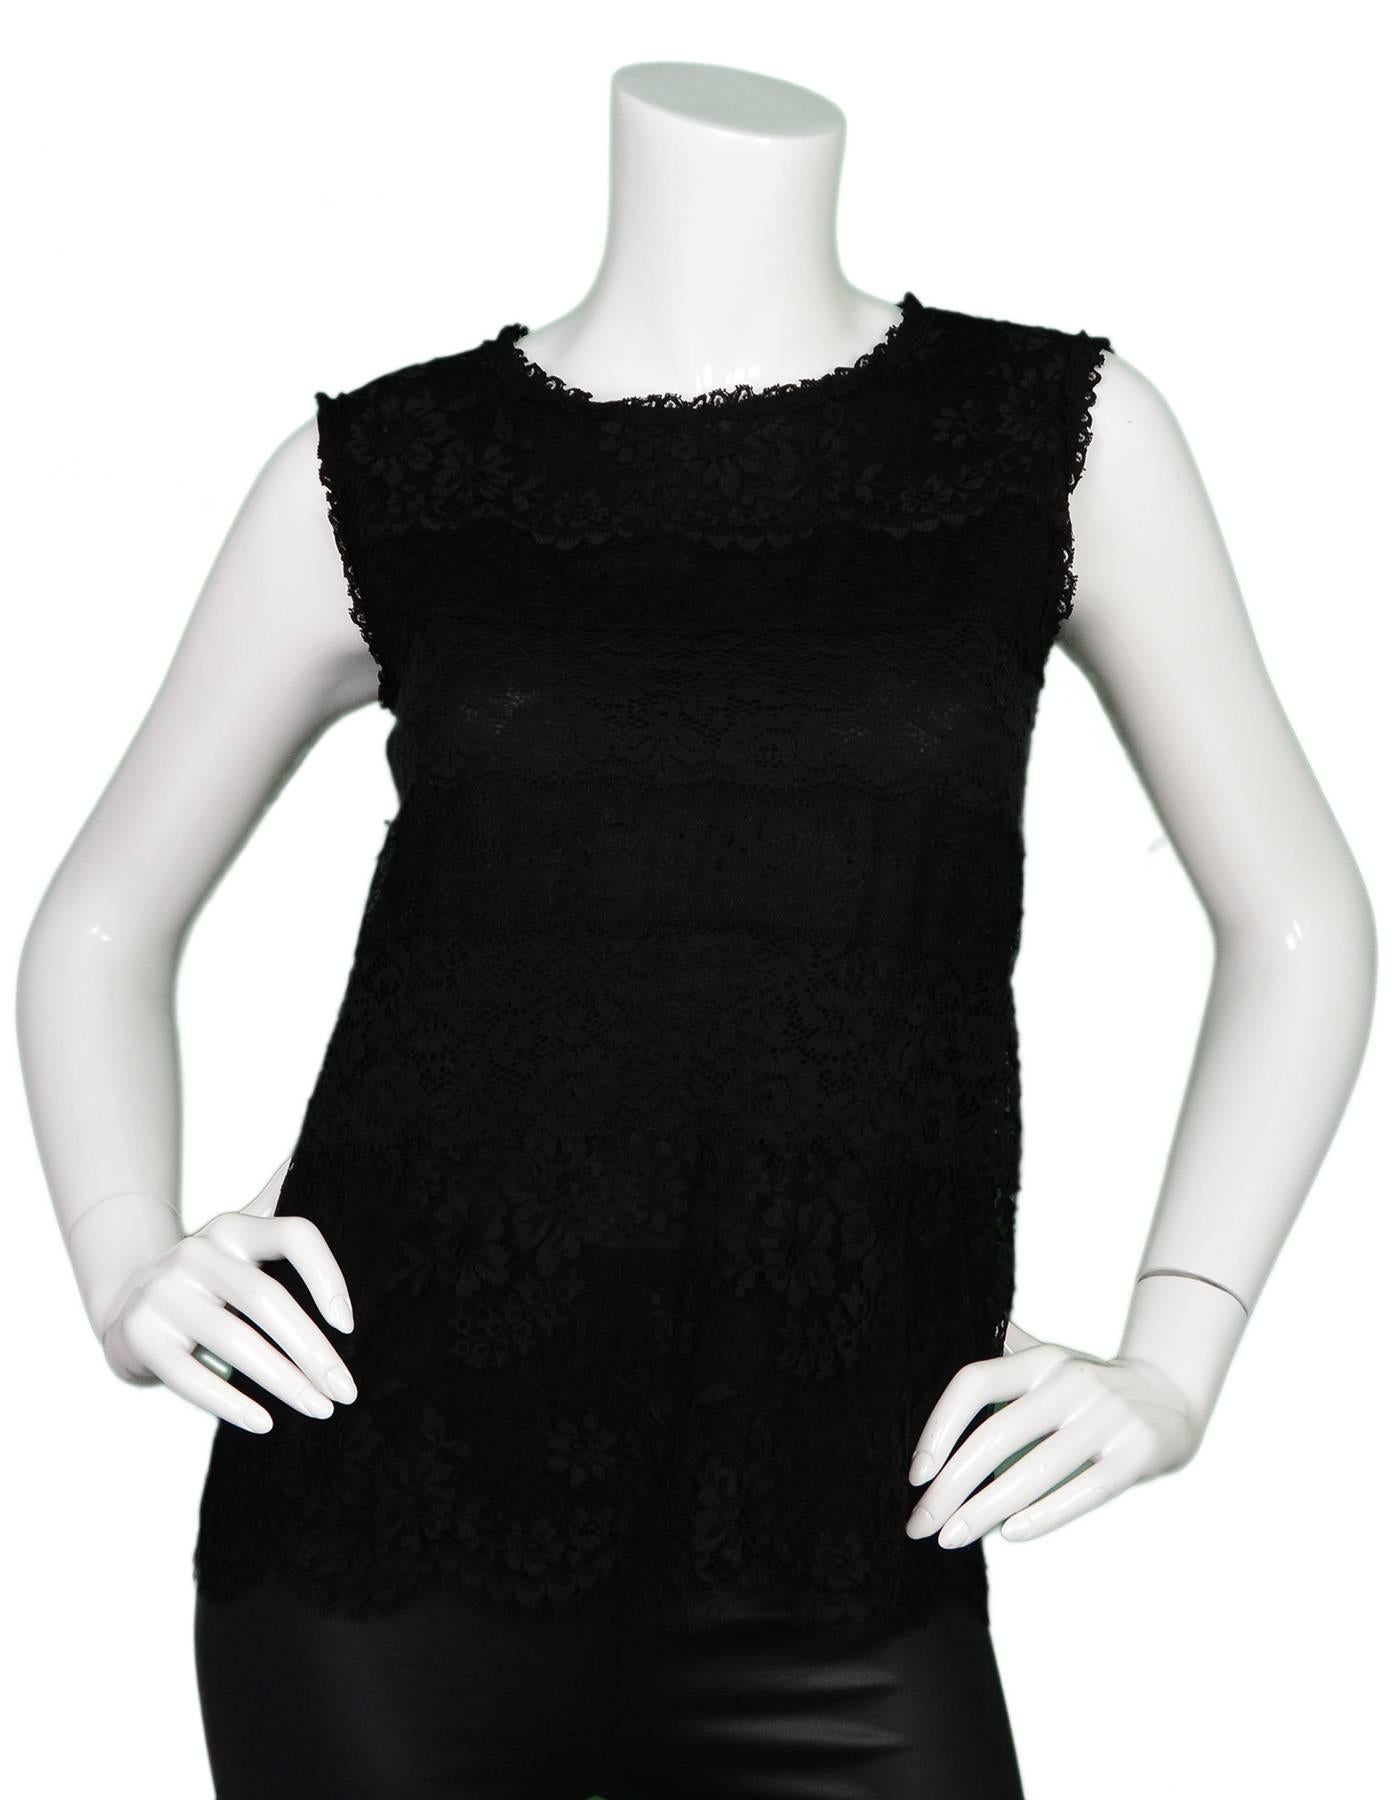 Dolce & Gabbana Black Lace Sleeveless Top 
Features black modal underlay

Made In: Italy
Color: Black 
Composition: 70% cotton, 20% nylon, 10% viscose
Lining: Black, 100% modal
Closure/Opening: Pull over with back neck button closure
Exterior